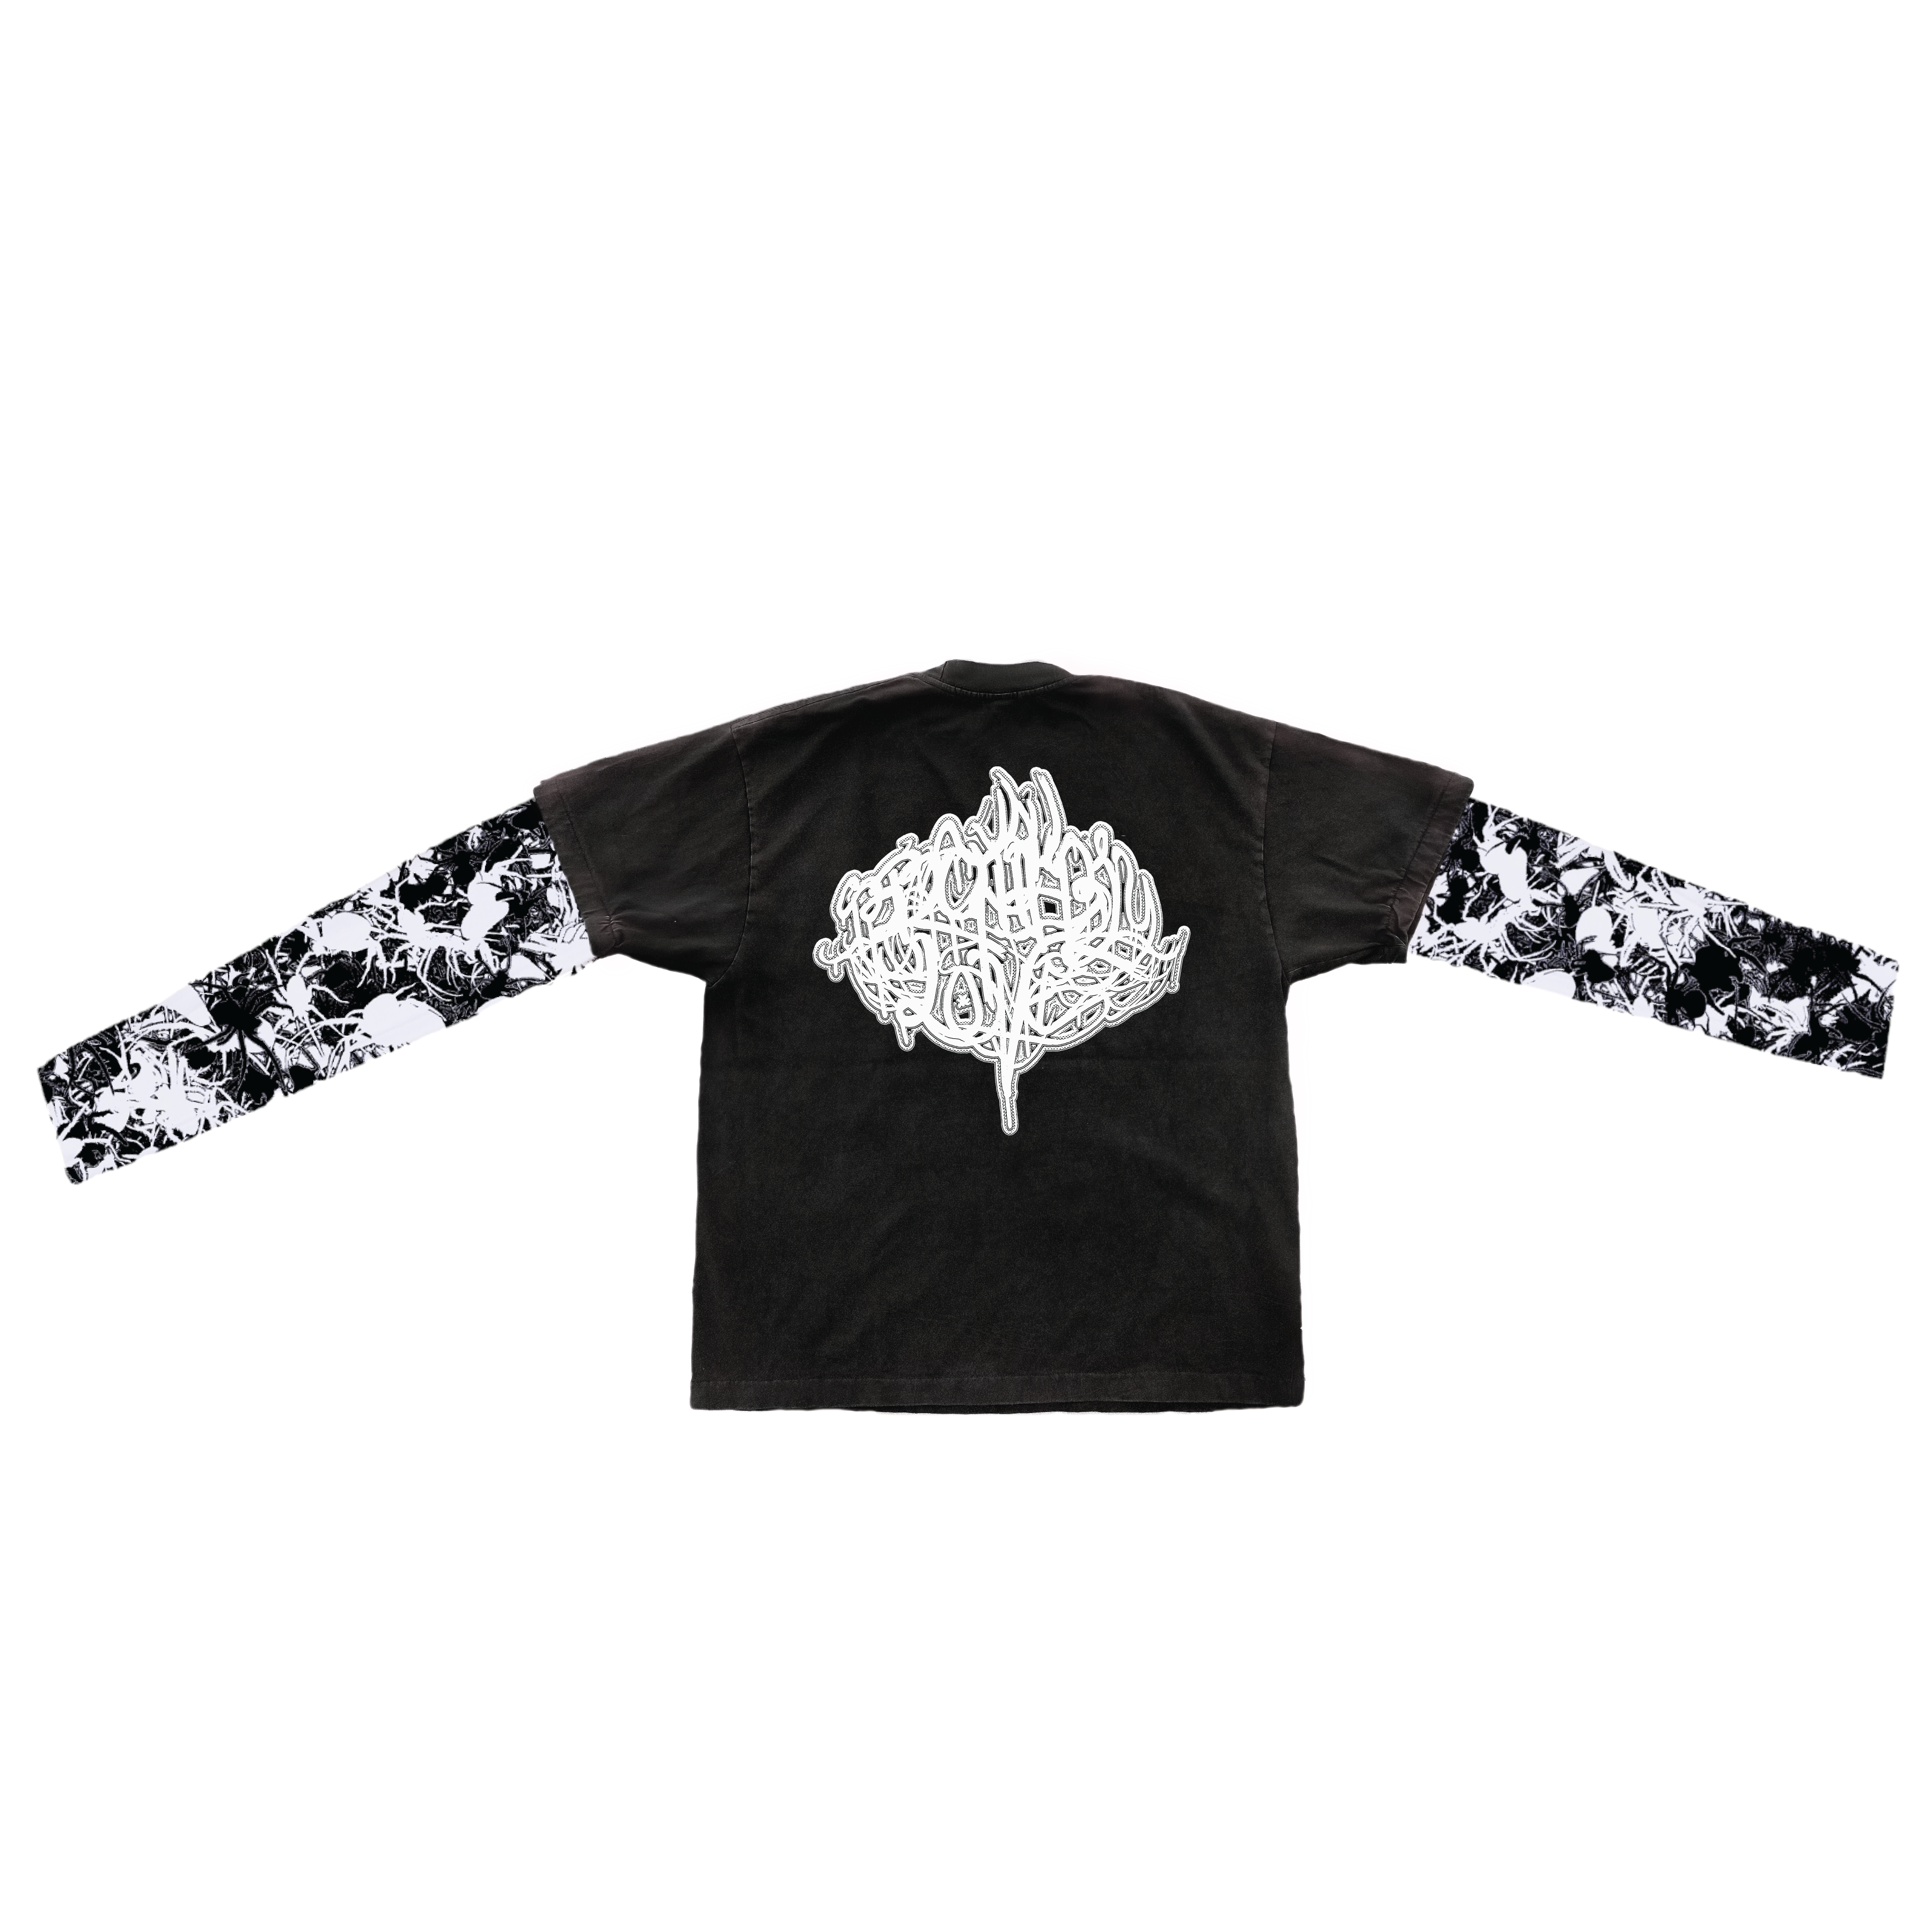 BL OVERLAPPING DIVINITY TEE WITH CAMO MESH SLEEVES